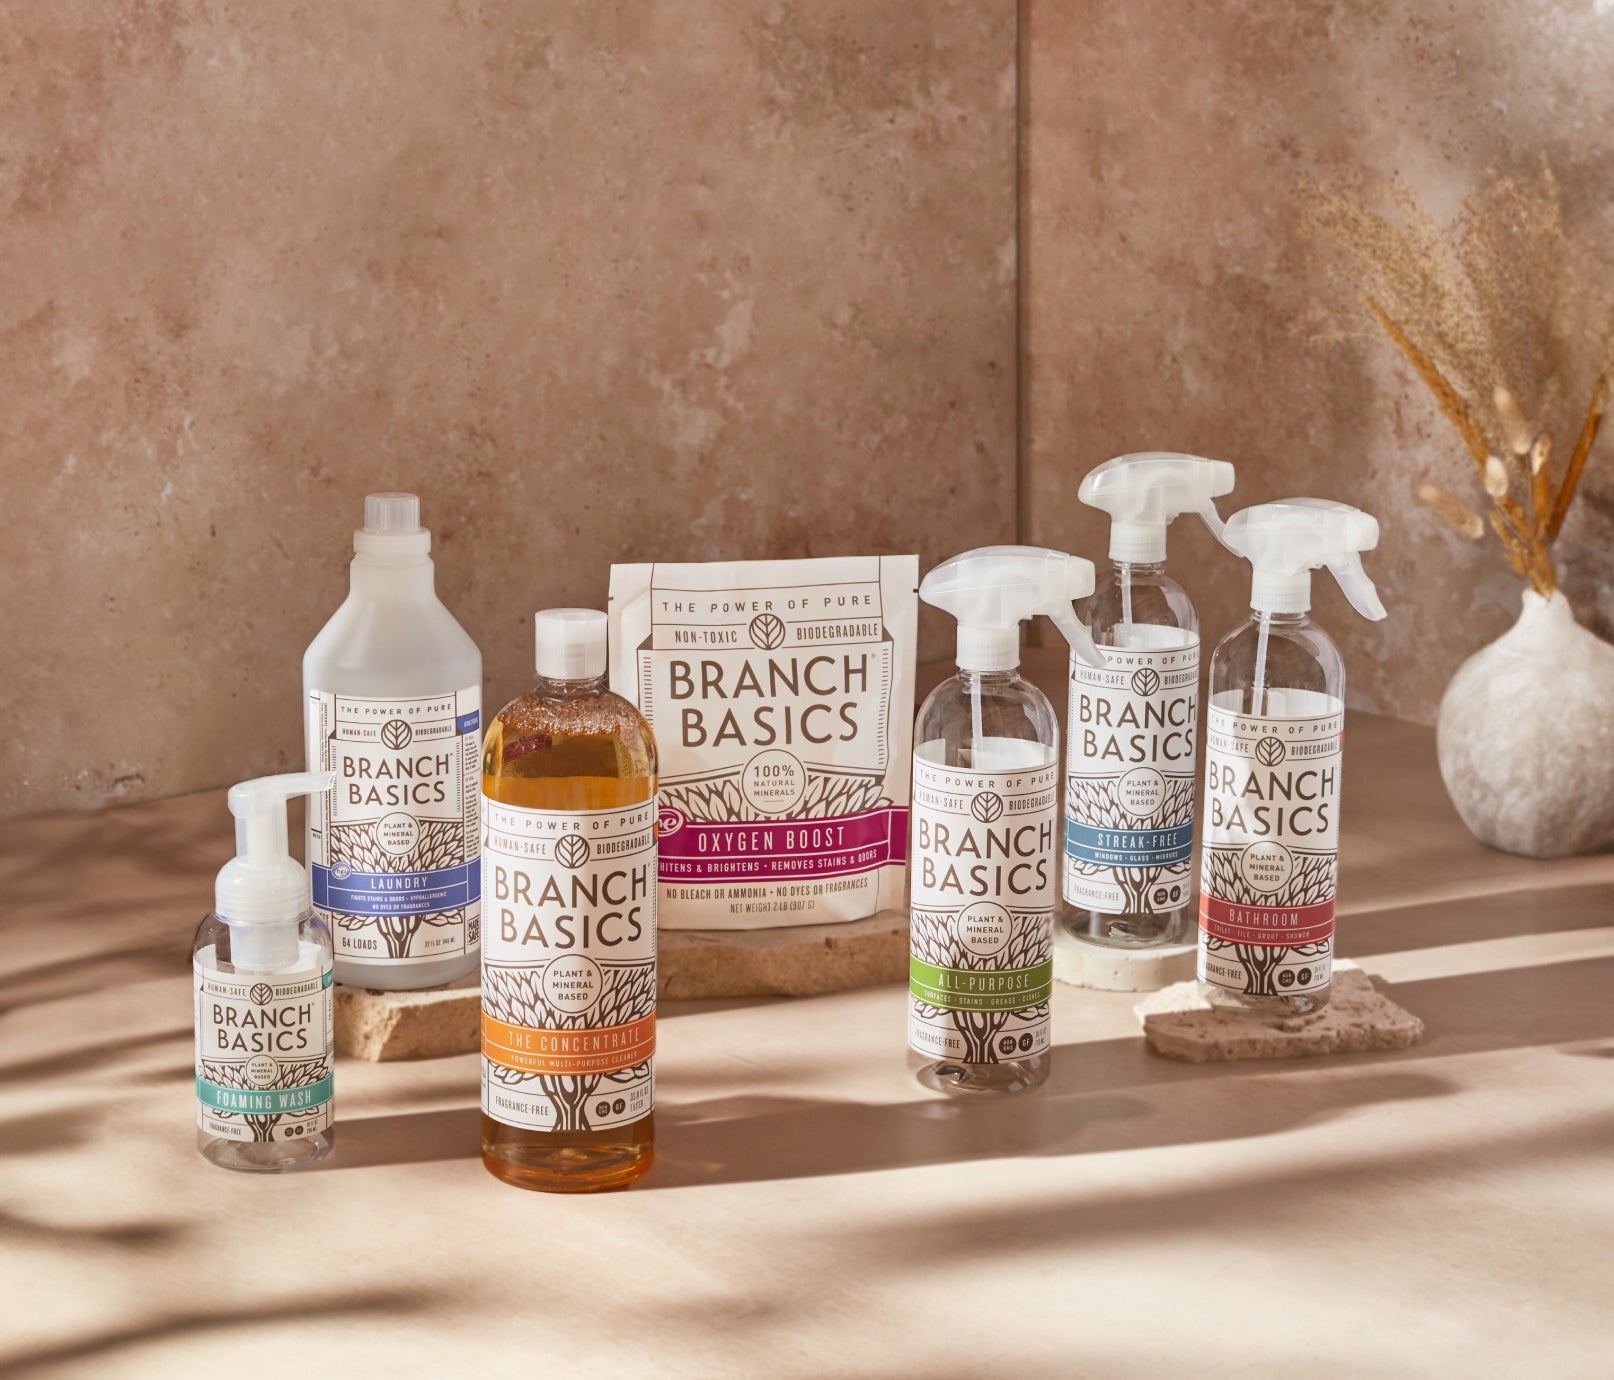 Premium Starter Kit: Non-Toxic Cleaning Products